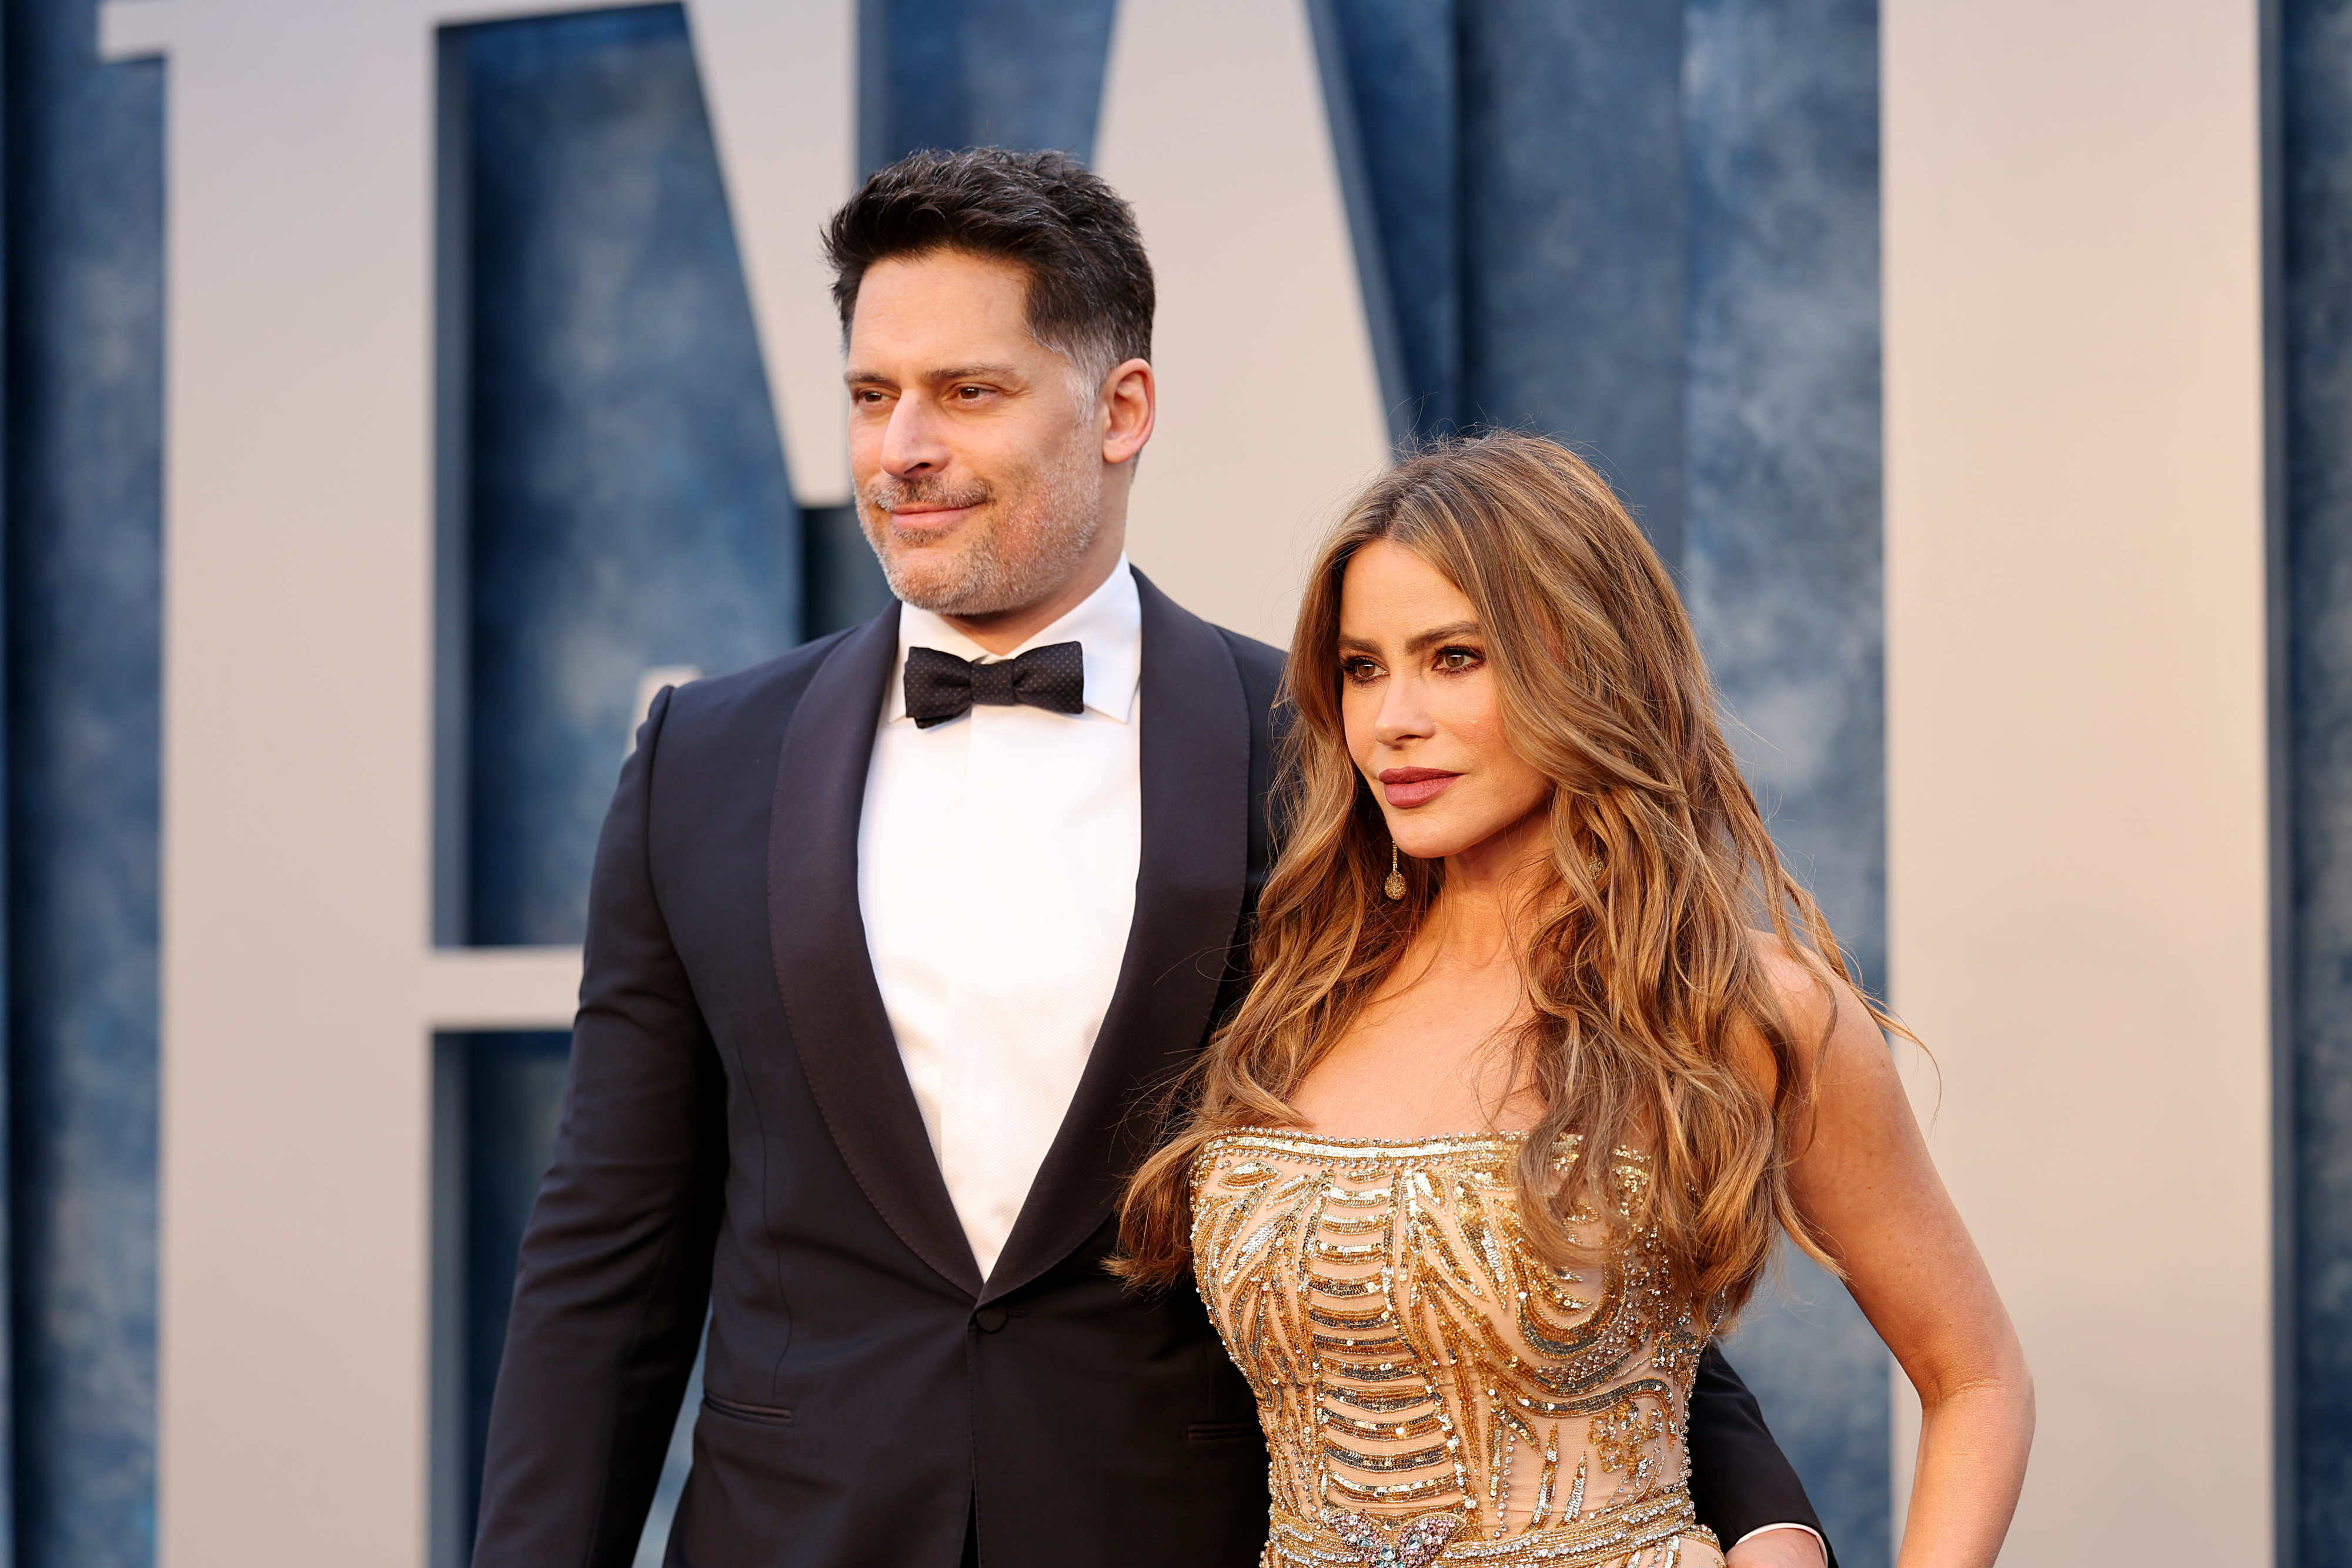 Close-up of Joe in a tuxe and Sofía in a gown at a media event